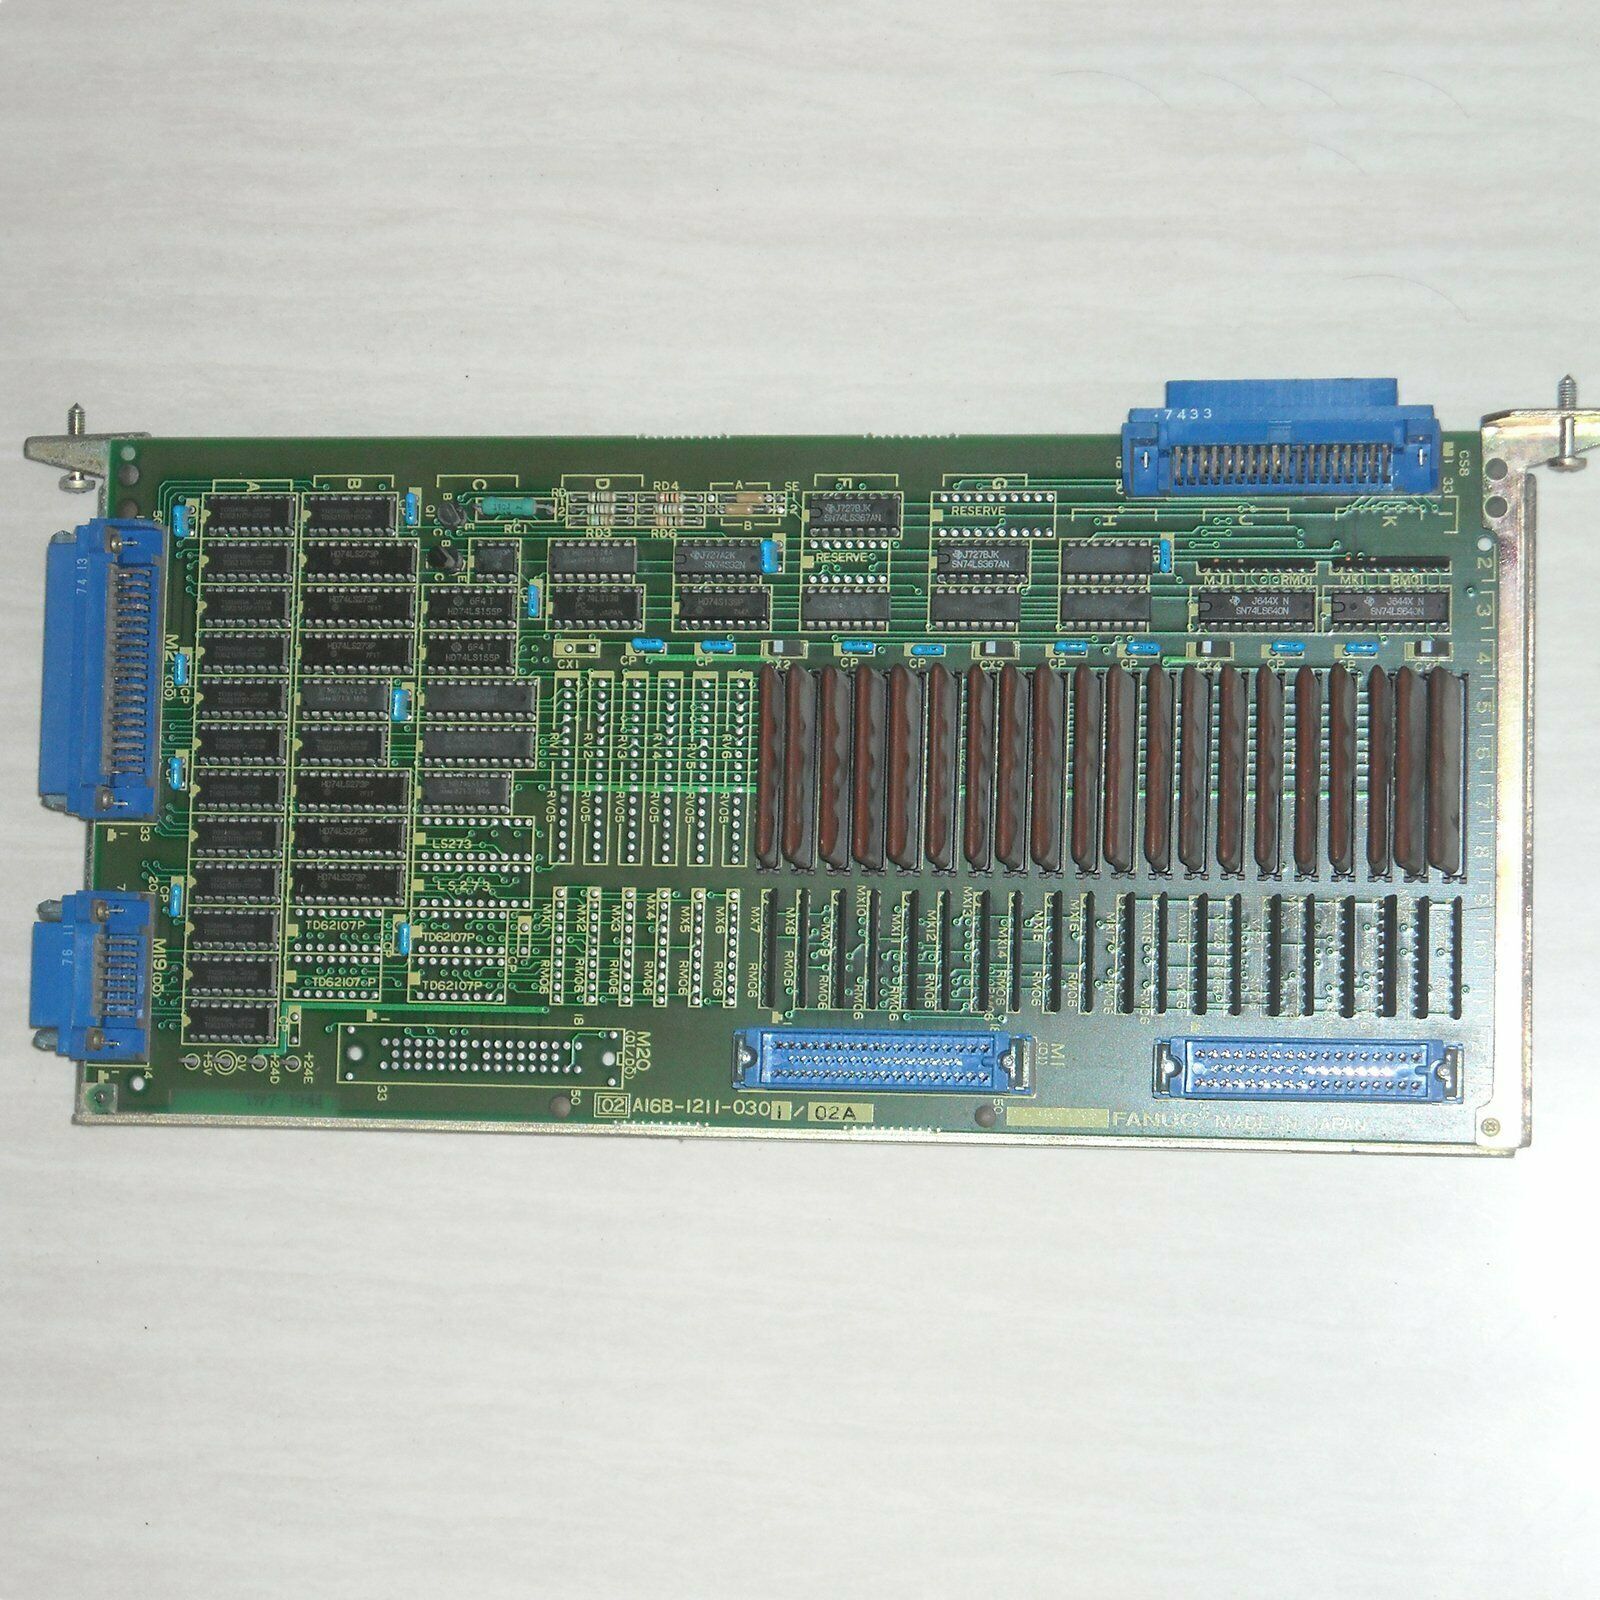 used One  Fanuc A16B-1211-0301 Board Tested in Good Condition